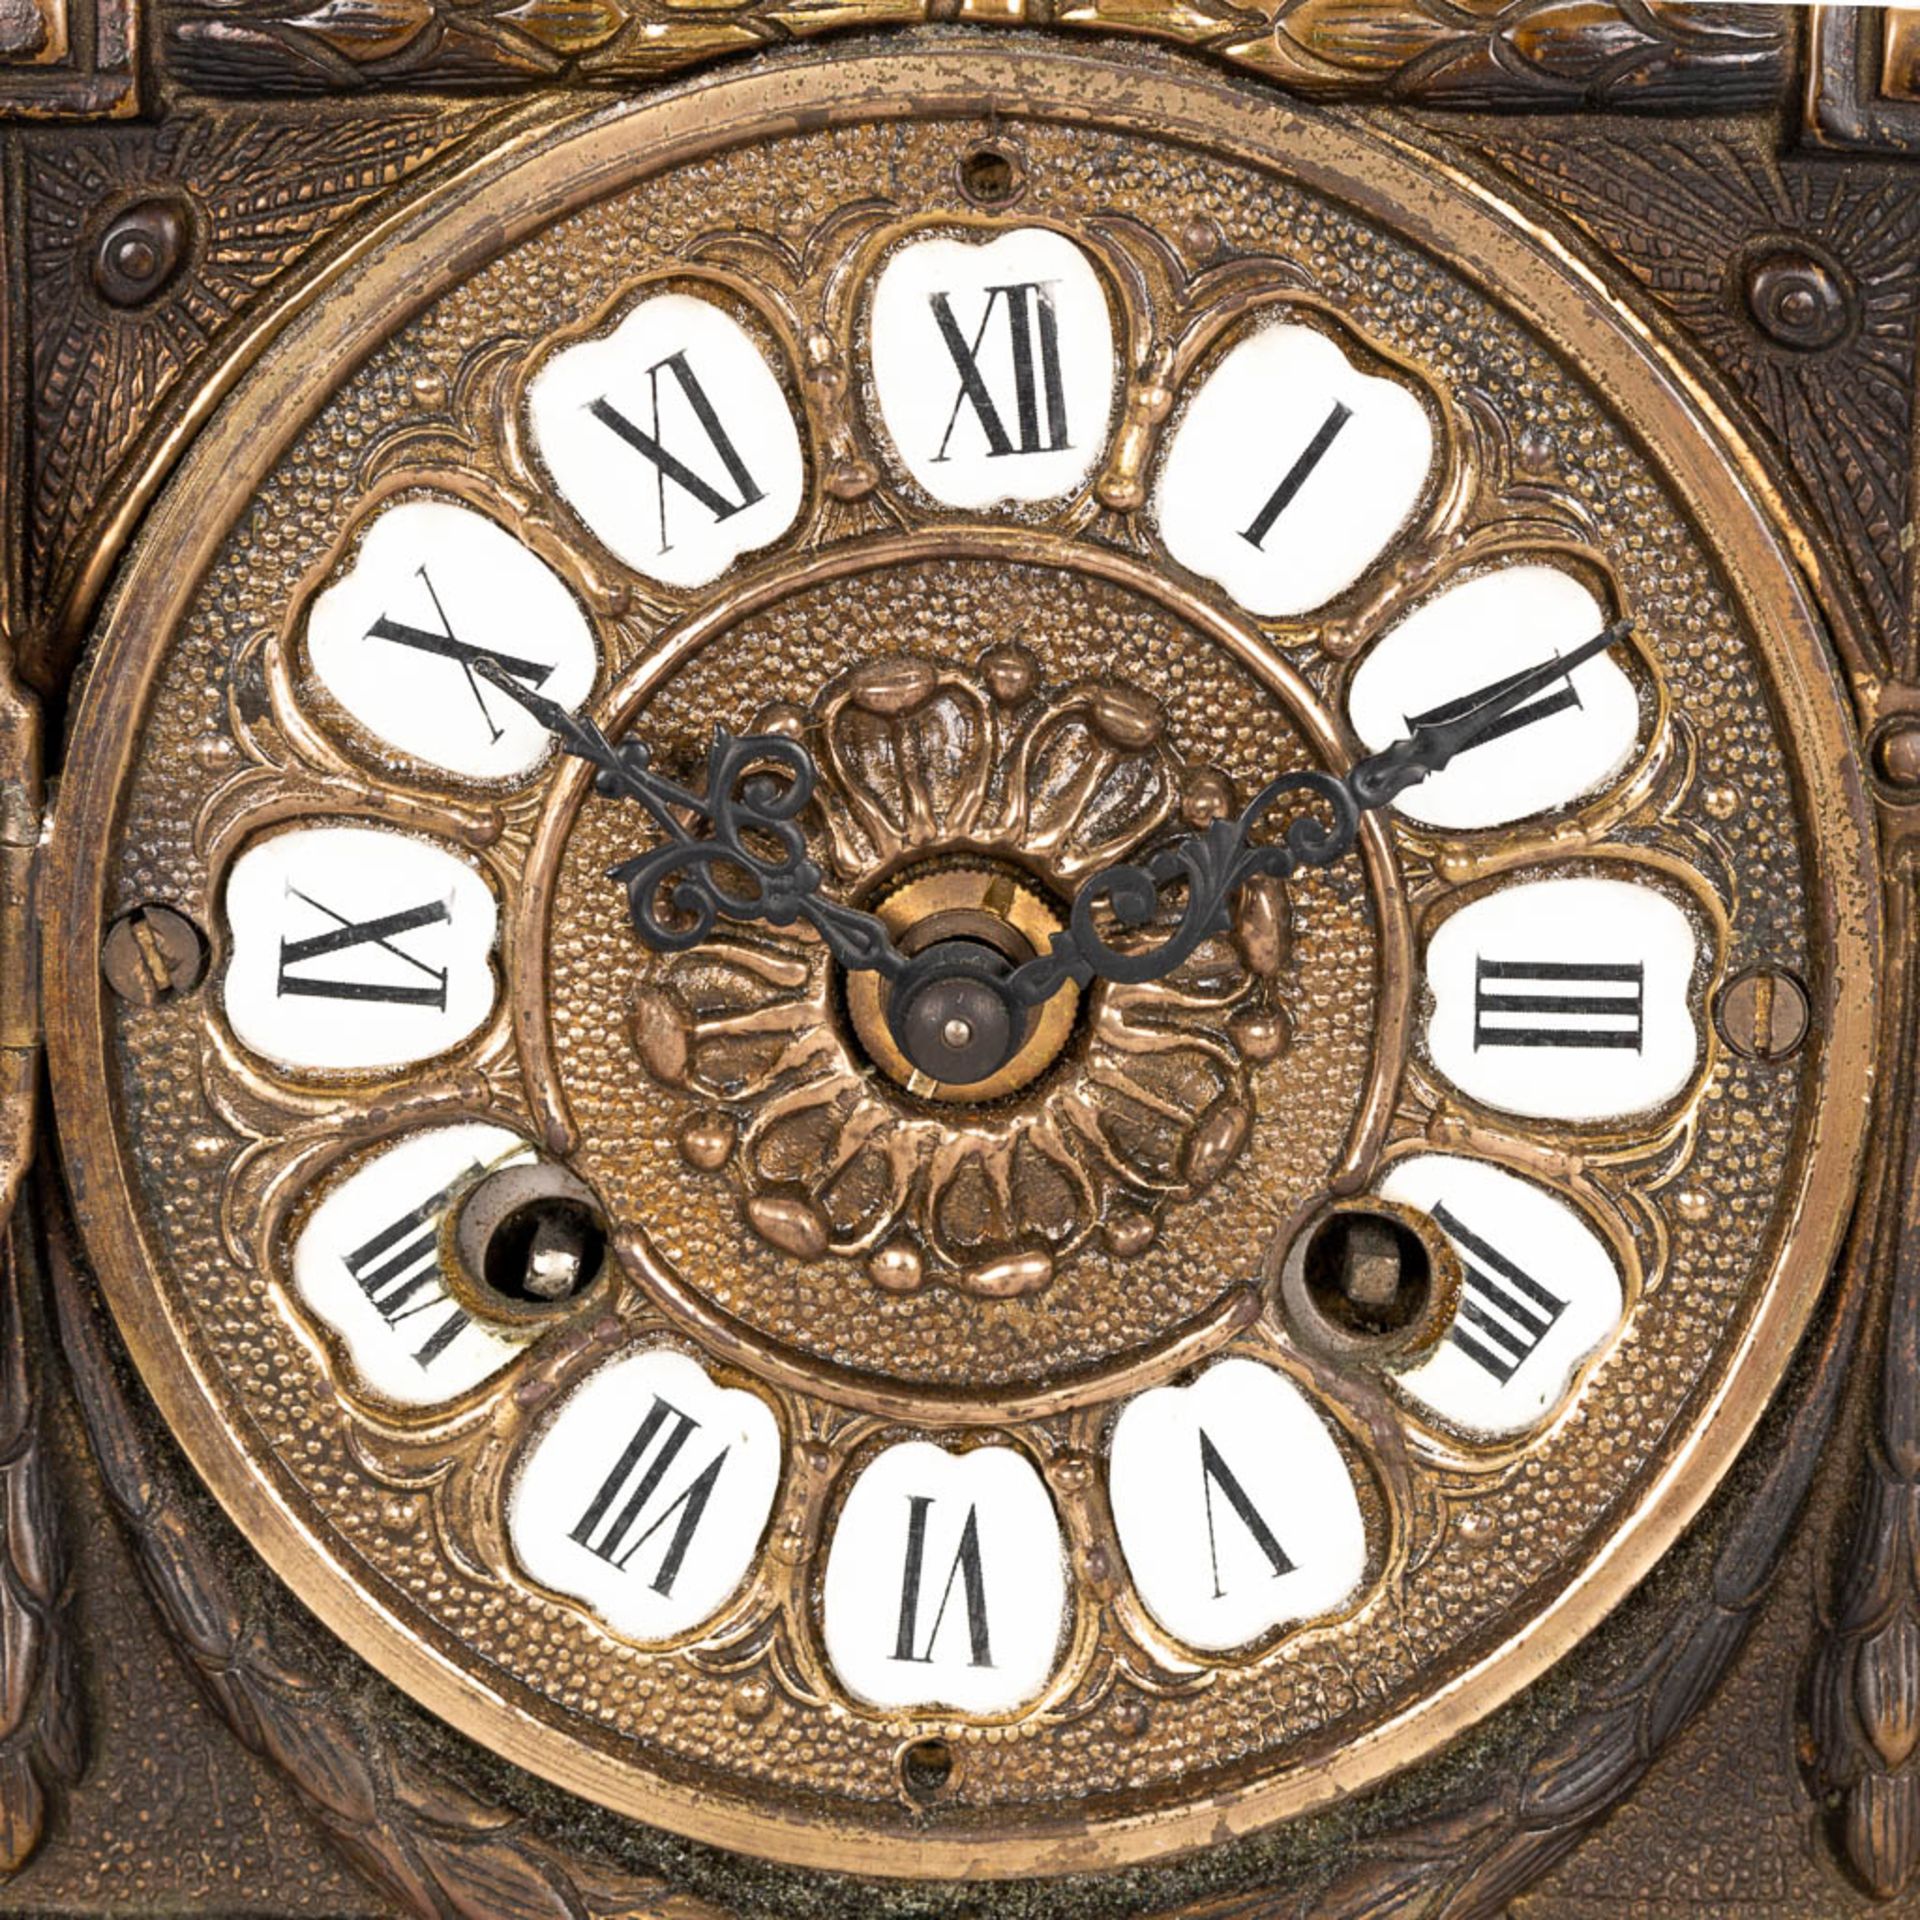 A 3 piece garniture clockset made of bronze, consisting of a clock with battle cart and 2 side piece - Image 16 of 18